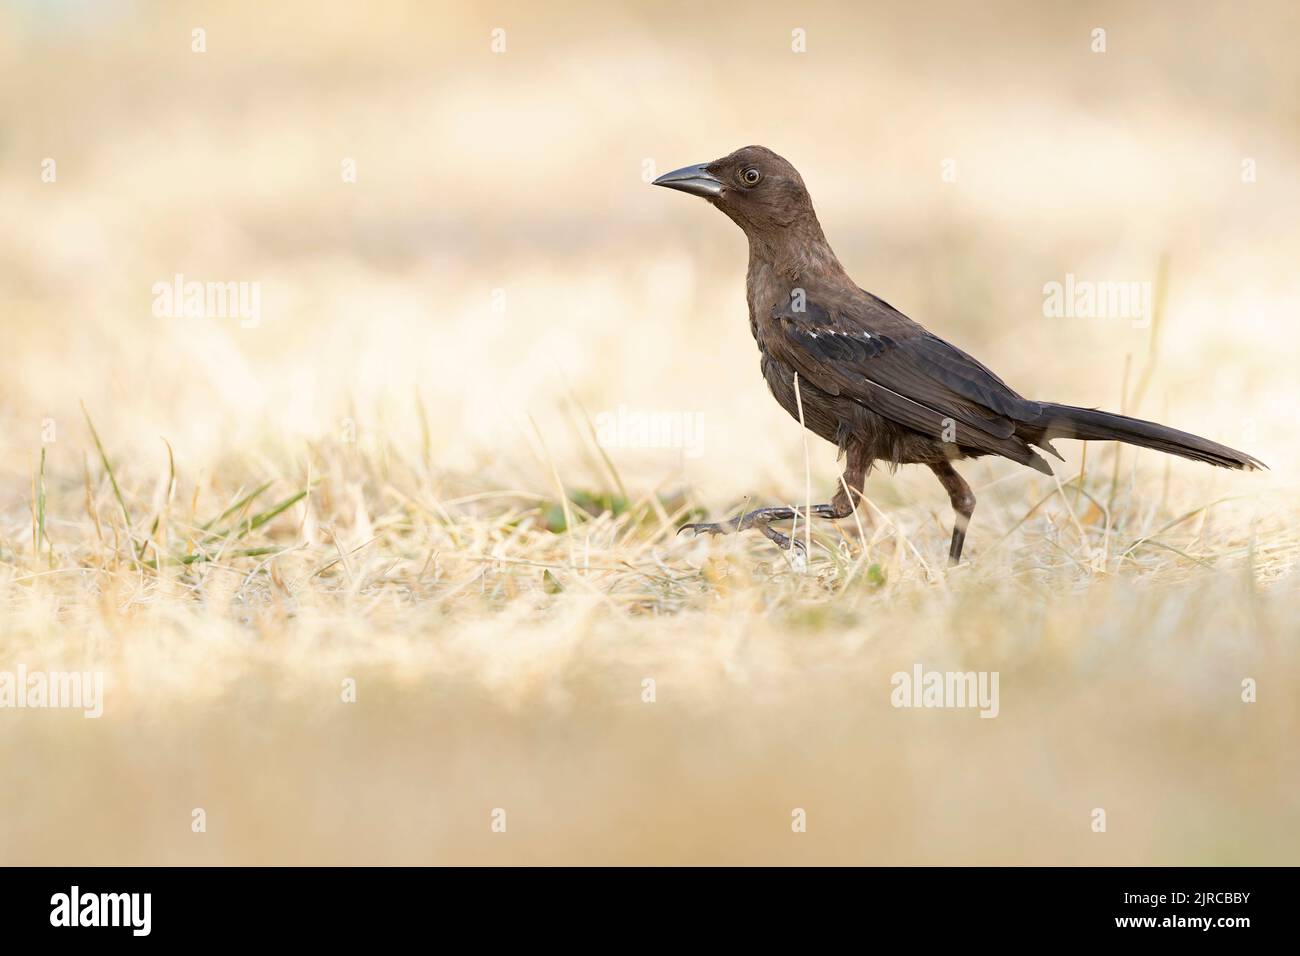 A common grackle (Quiscalus quiscula) foraging in a park in the grass in the morning light. Stock Photo